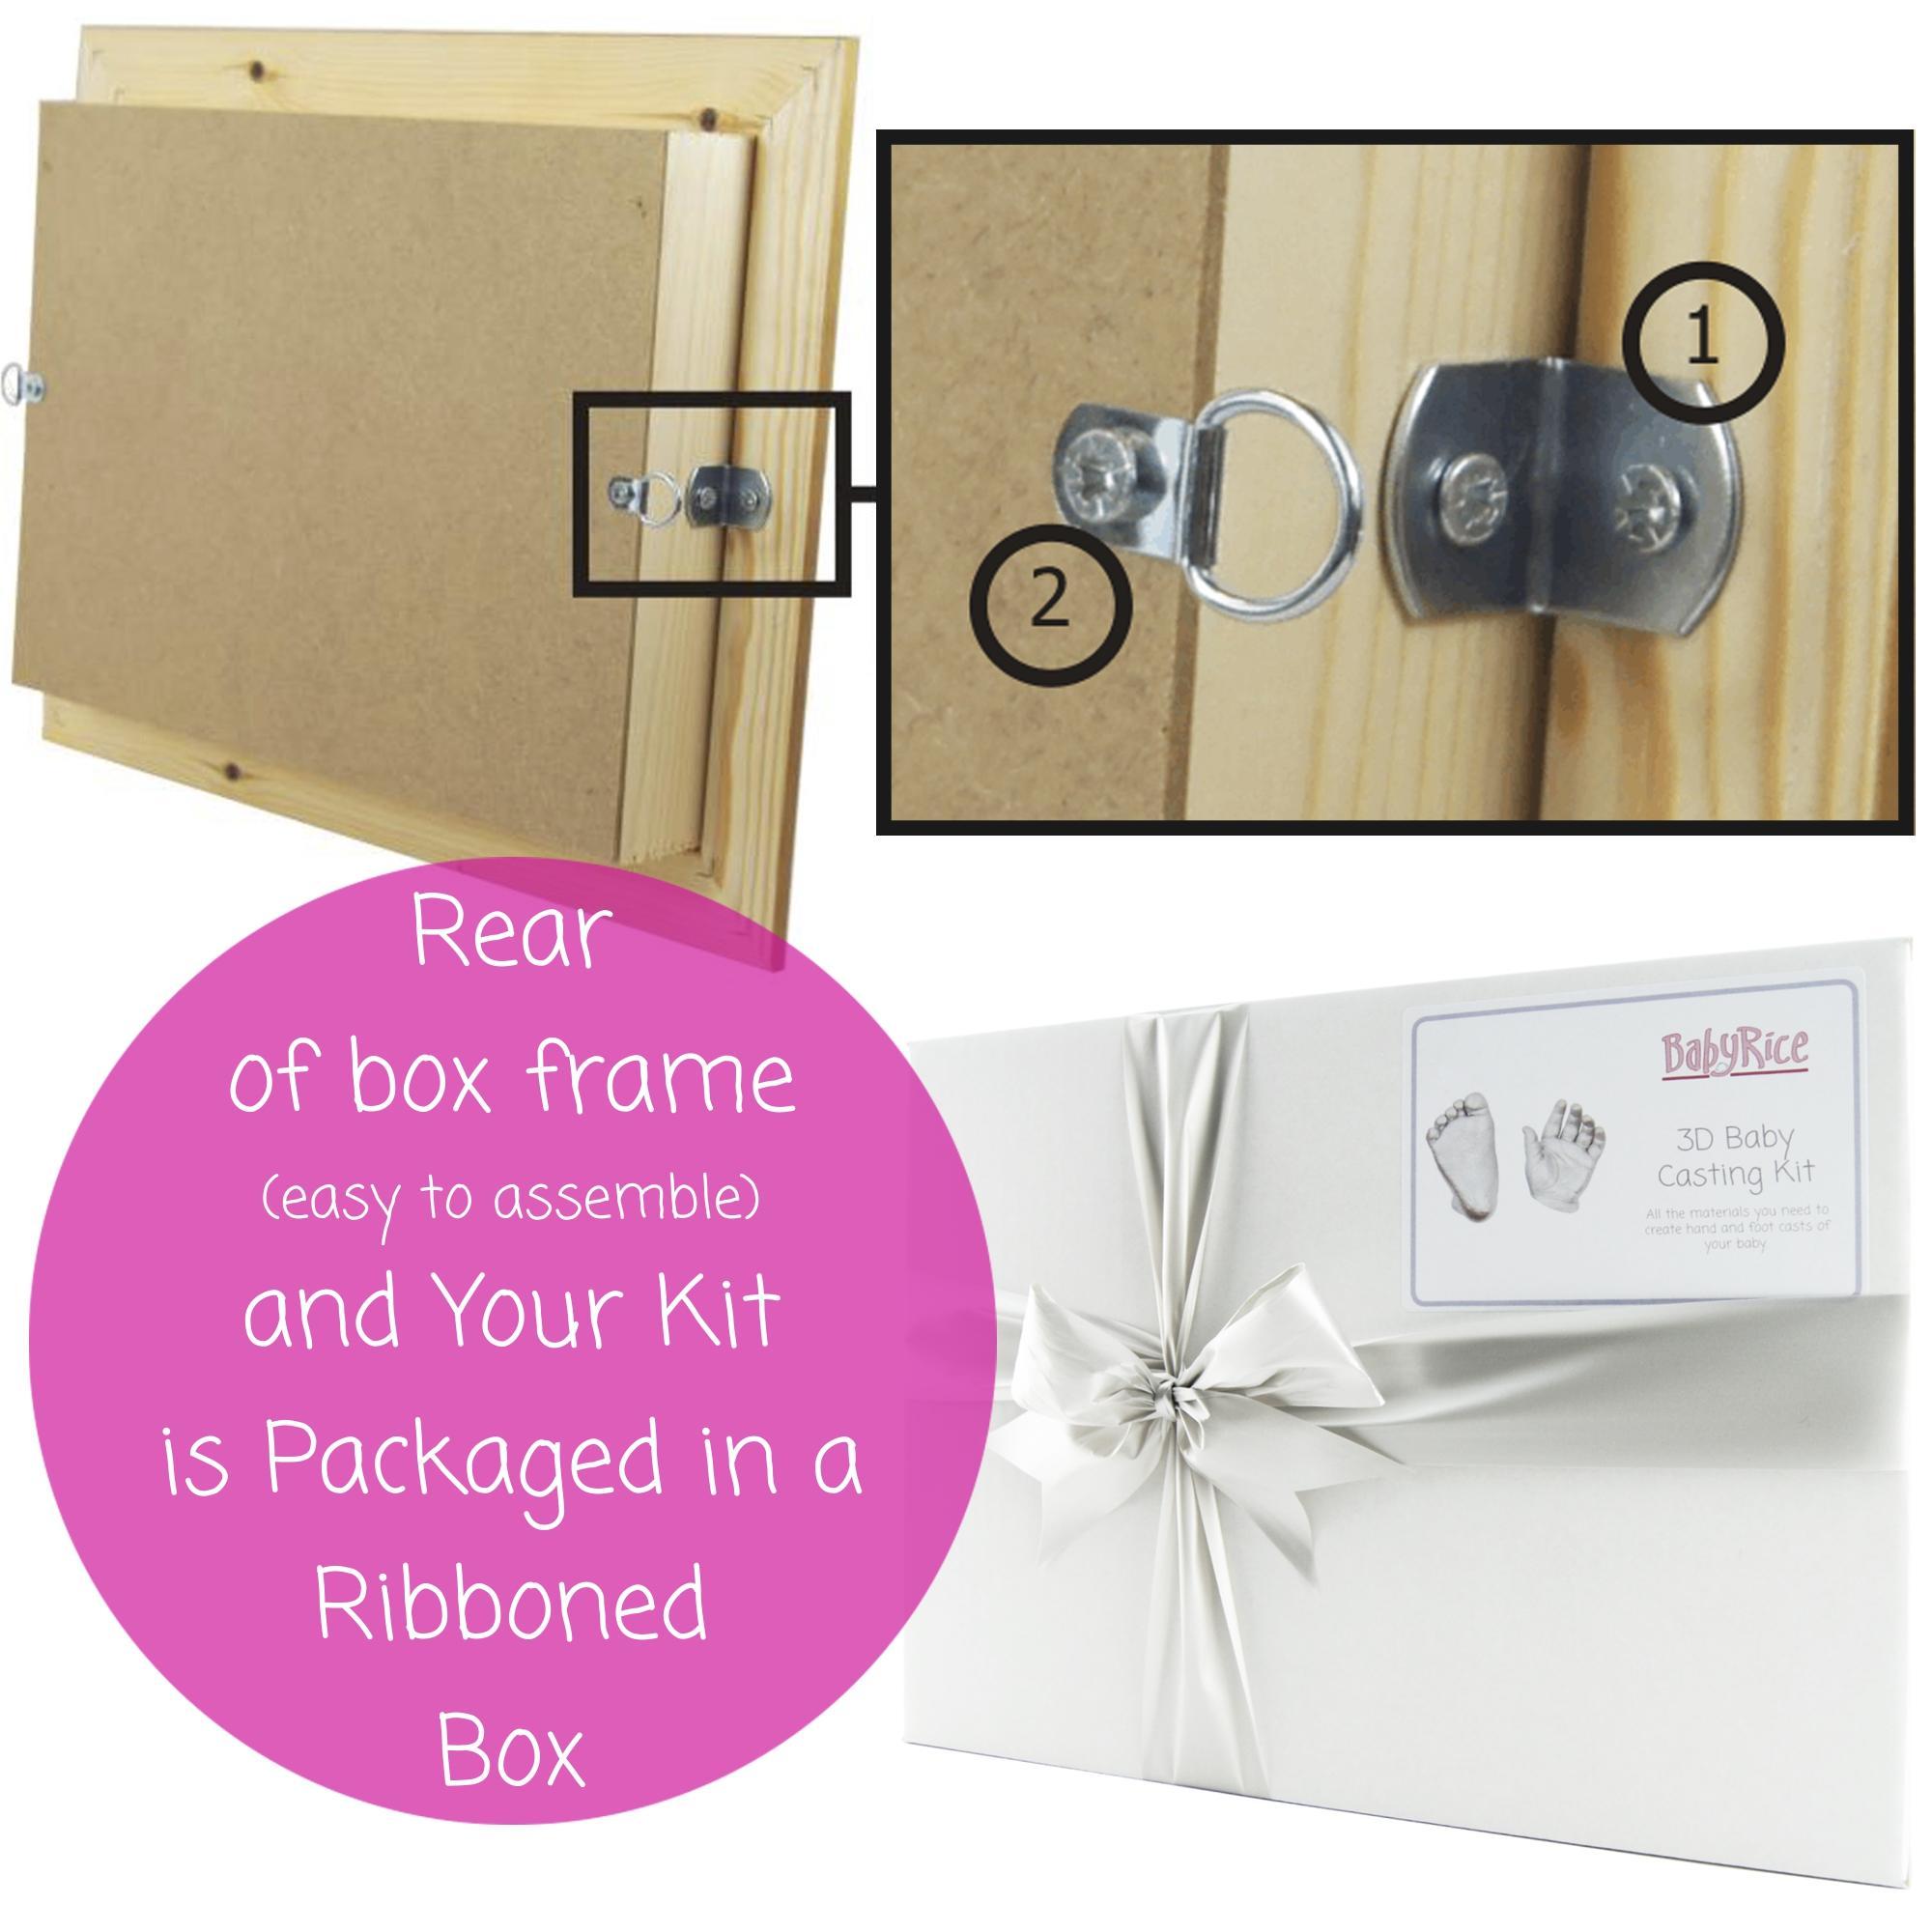 Rear of box frame and gift packaging